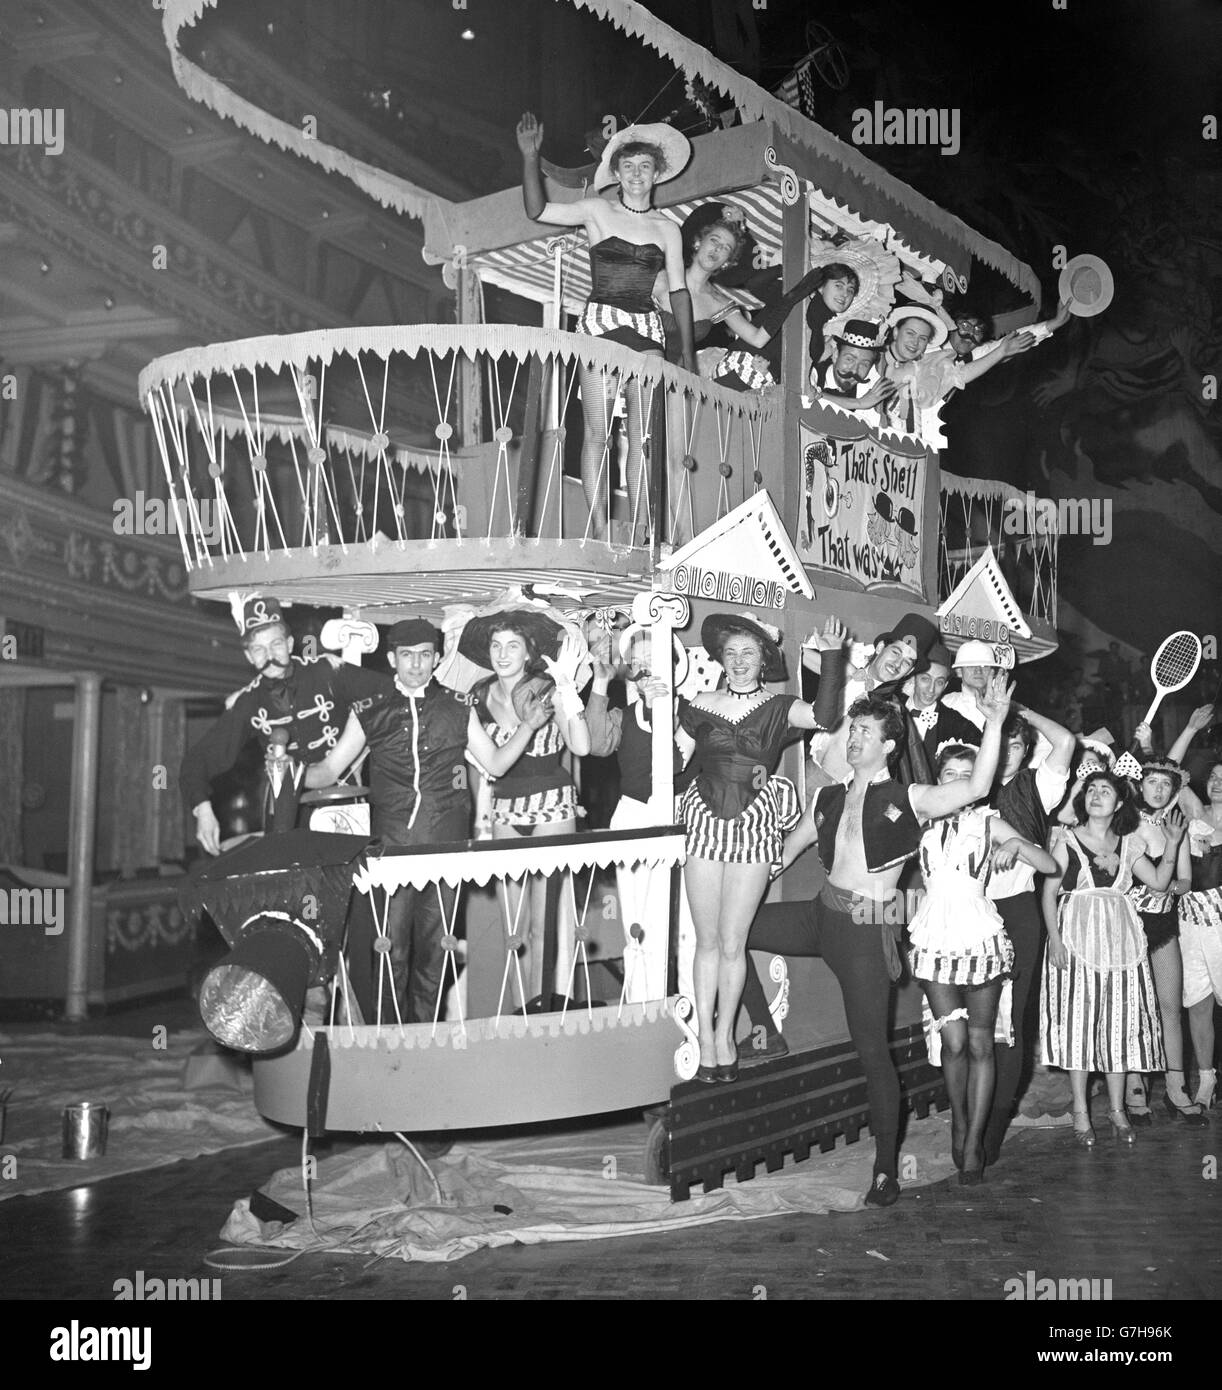 Performers ride on a tram car in the Royal Albert Hall, as part of the Chelsea Arts Ball on New Year's Eve. Stock Photo